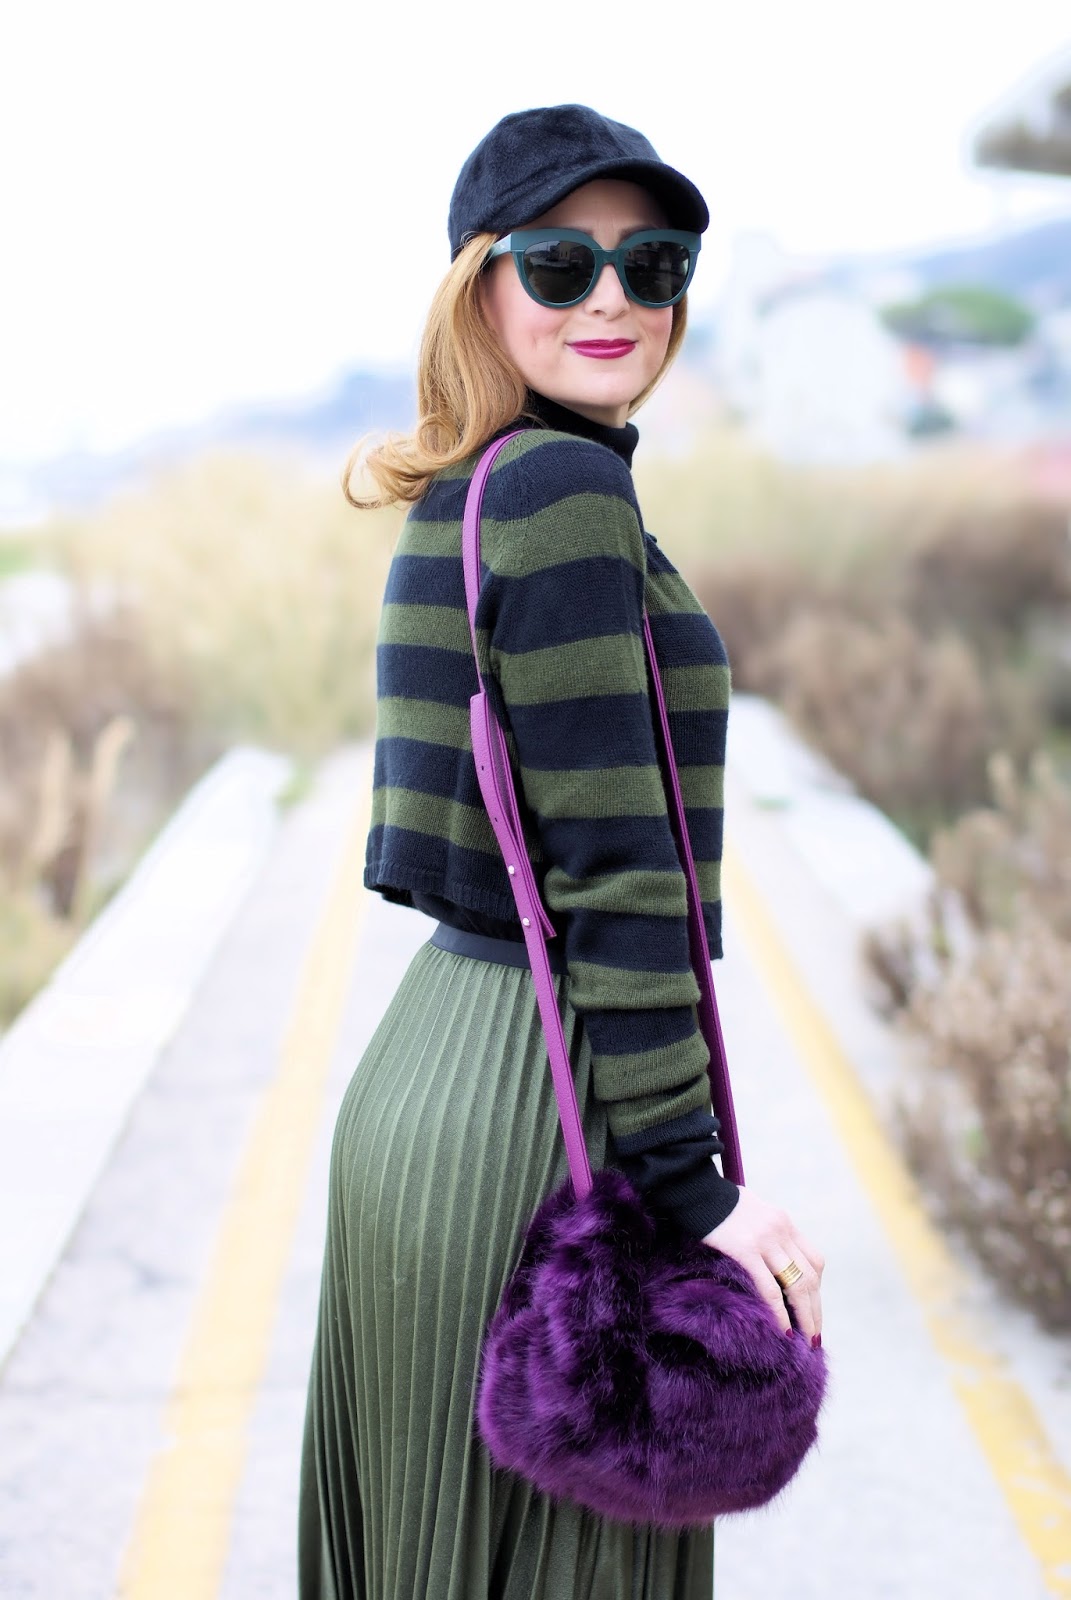 Faux fur bag and Muff with green pleated skirt on Fashion and Cookies fashion blog, fashion blogger style